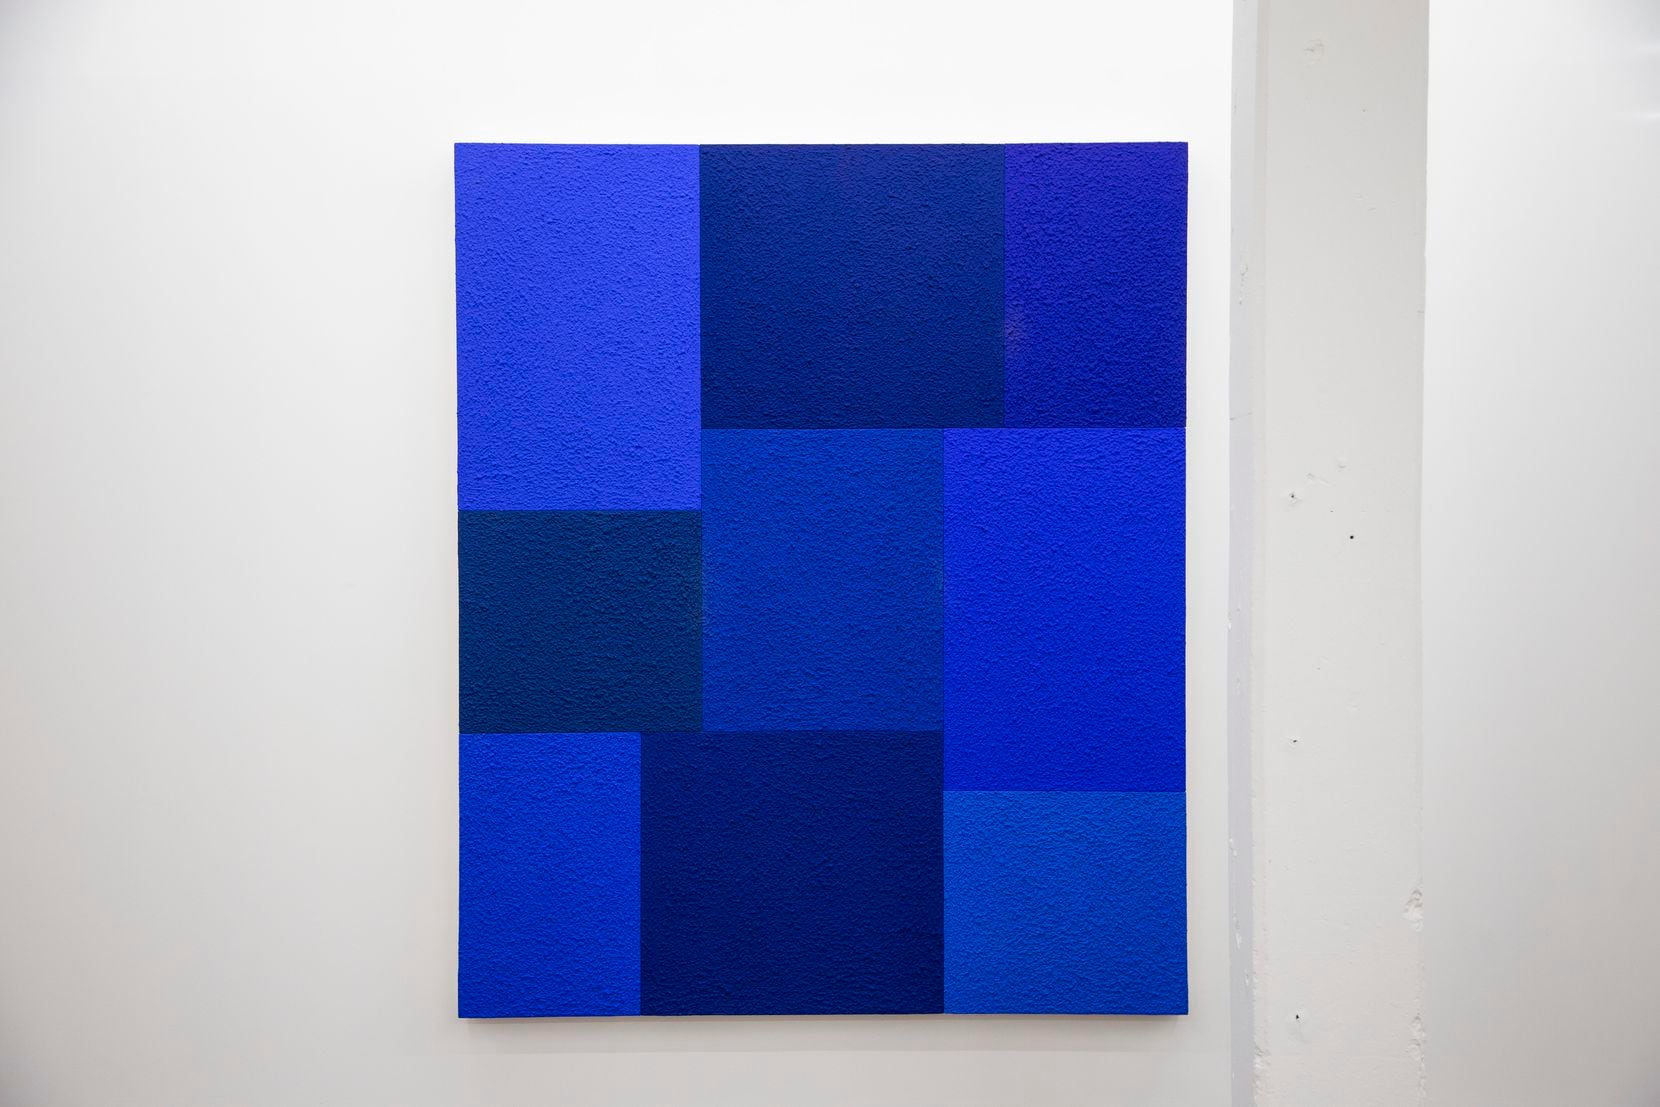 Peter Halley offers vibrant geometries of painted rectilinear shapes in his exhibition.